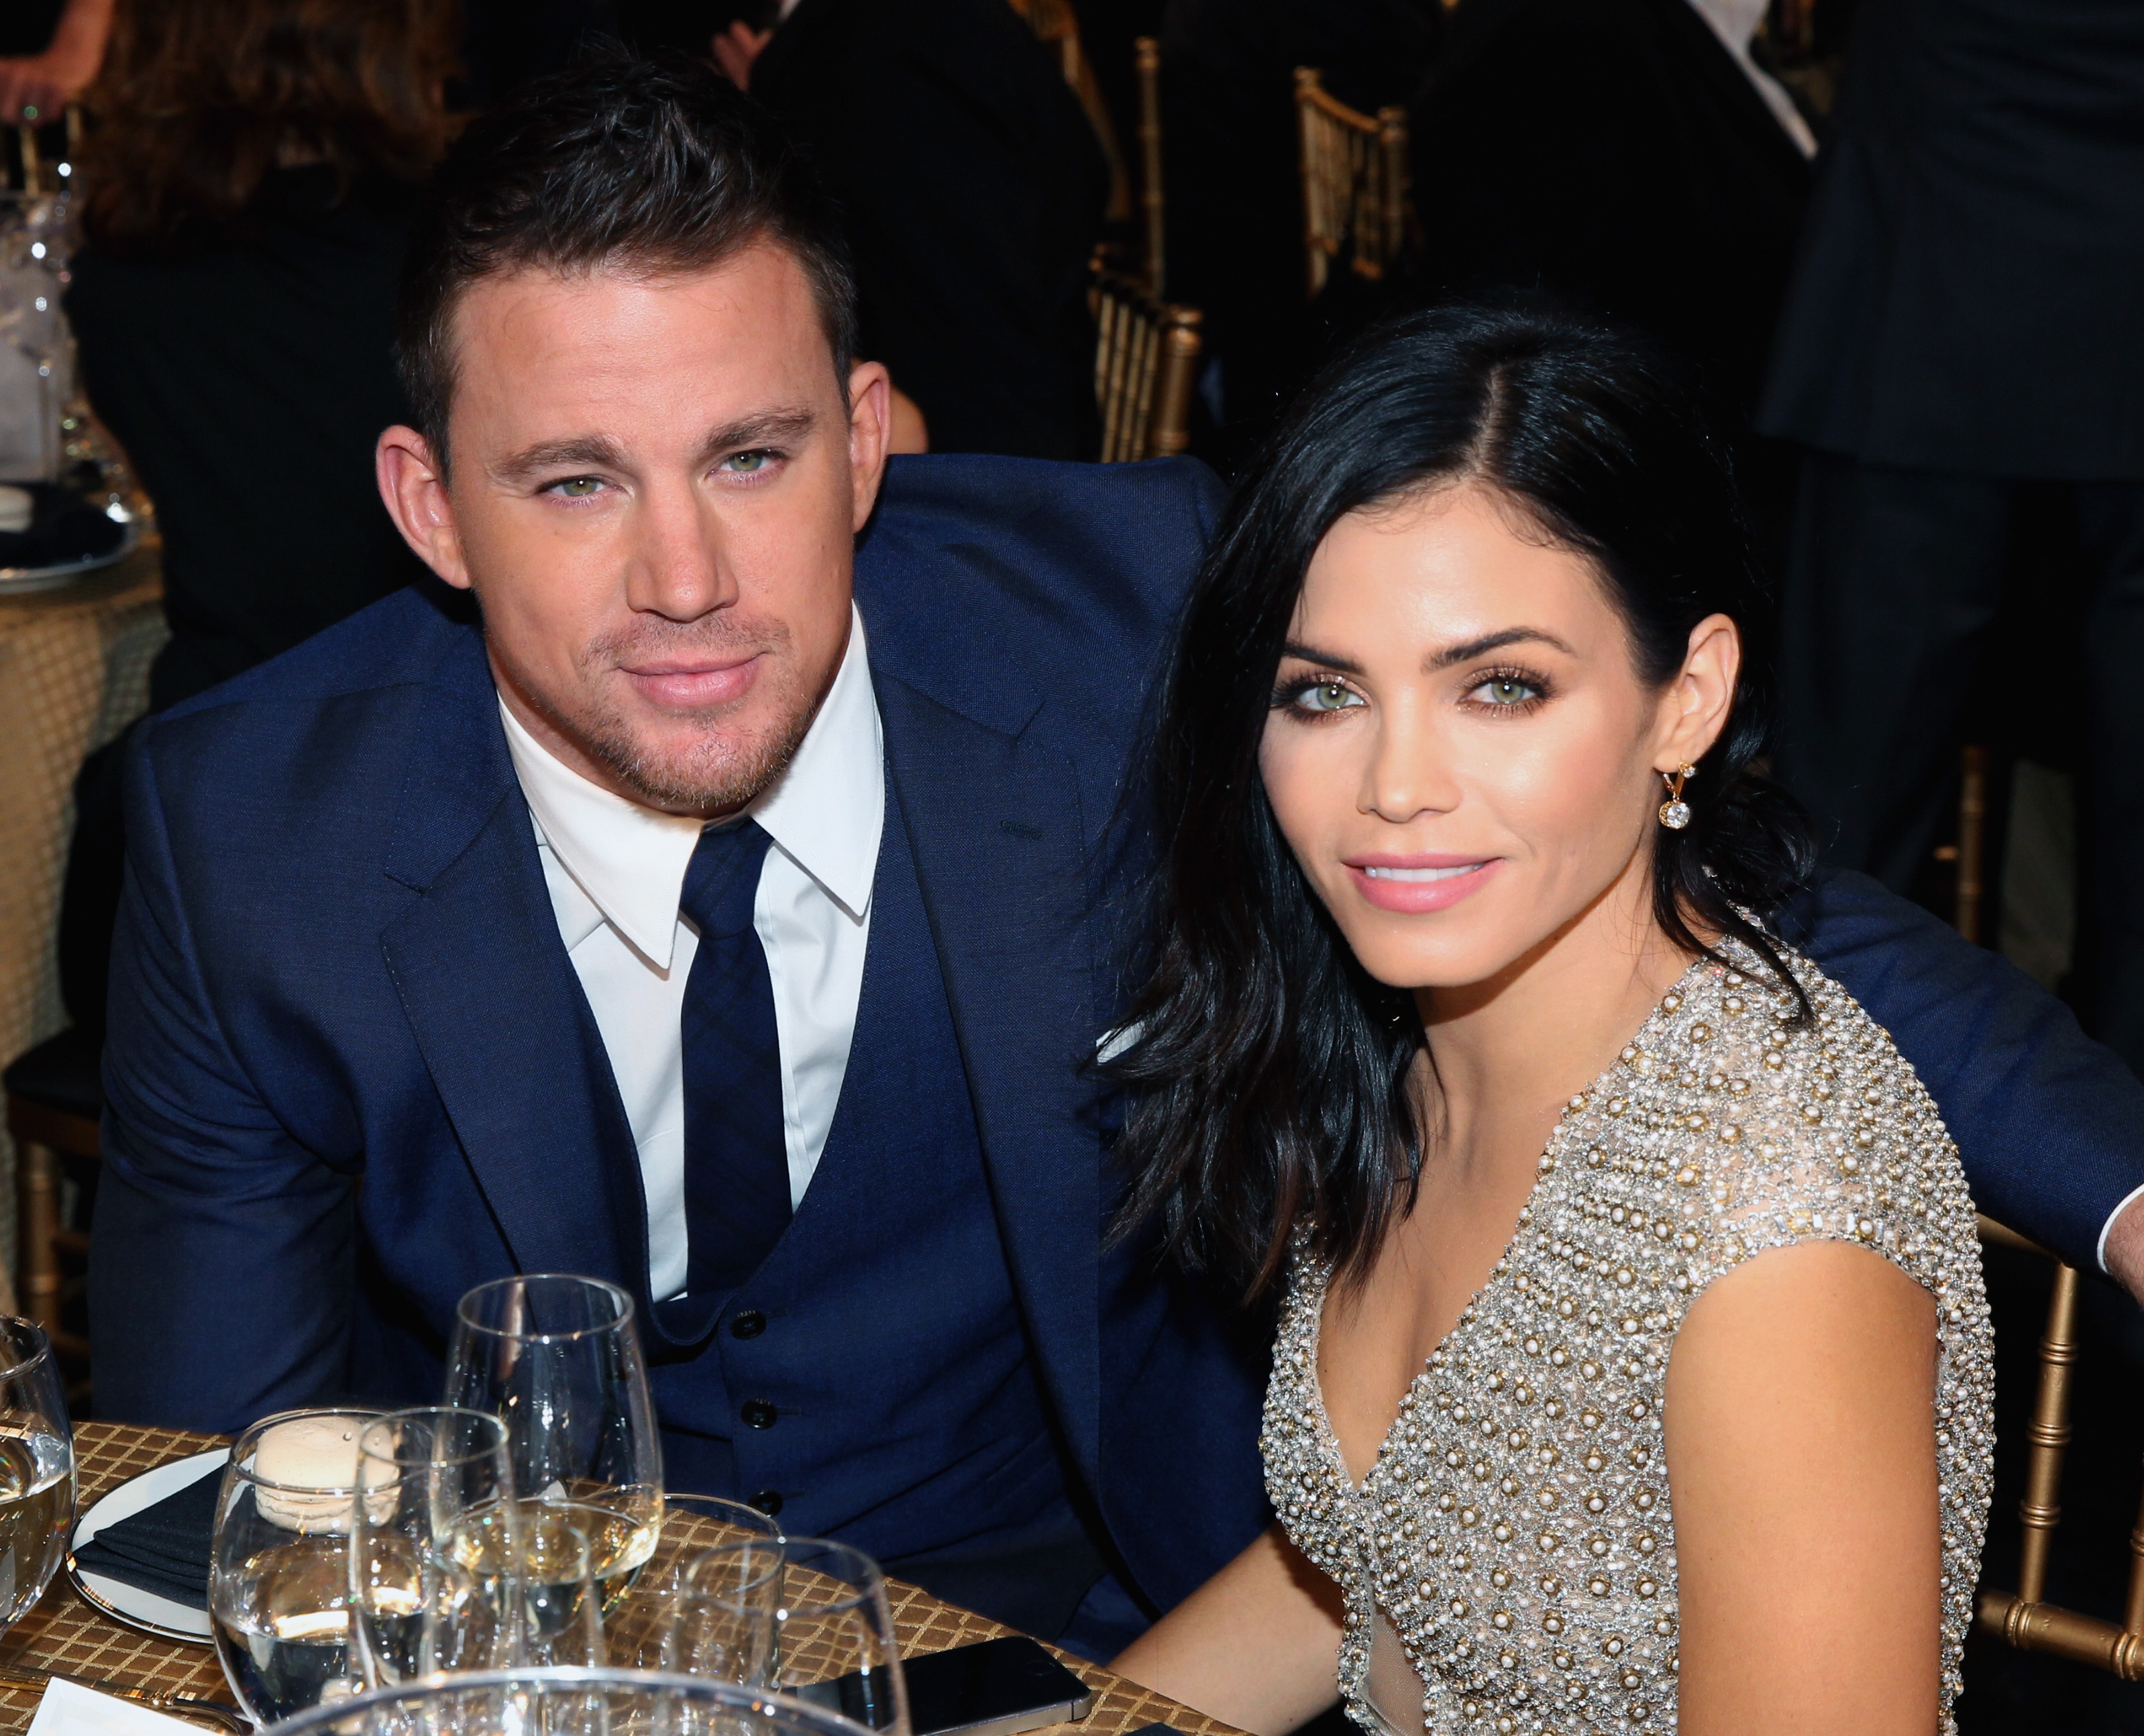 Channing Tatum and Jenna Dewan on November 14, 2014 in Hollywood, California. | Source: Getty Images